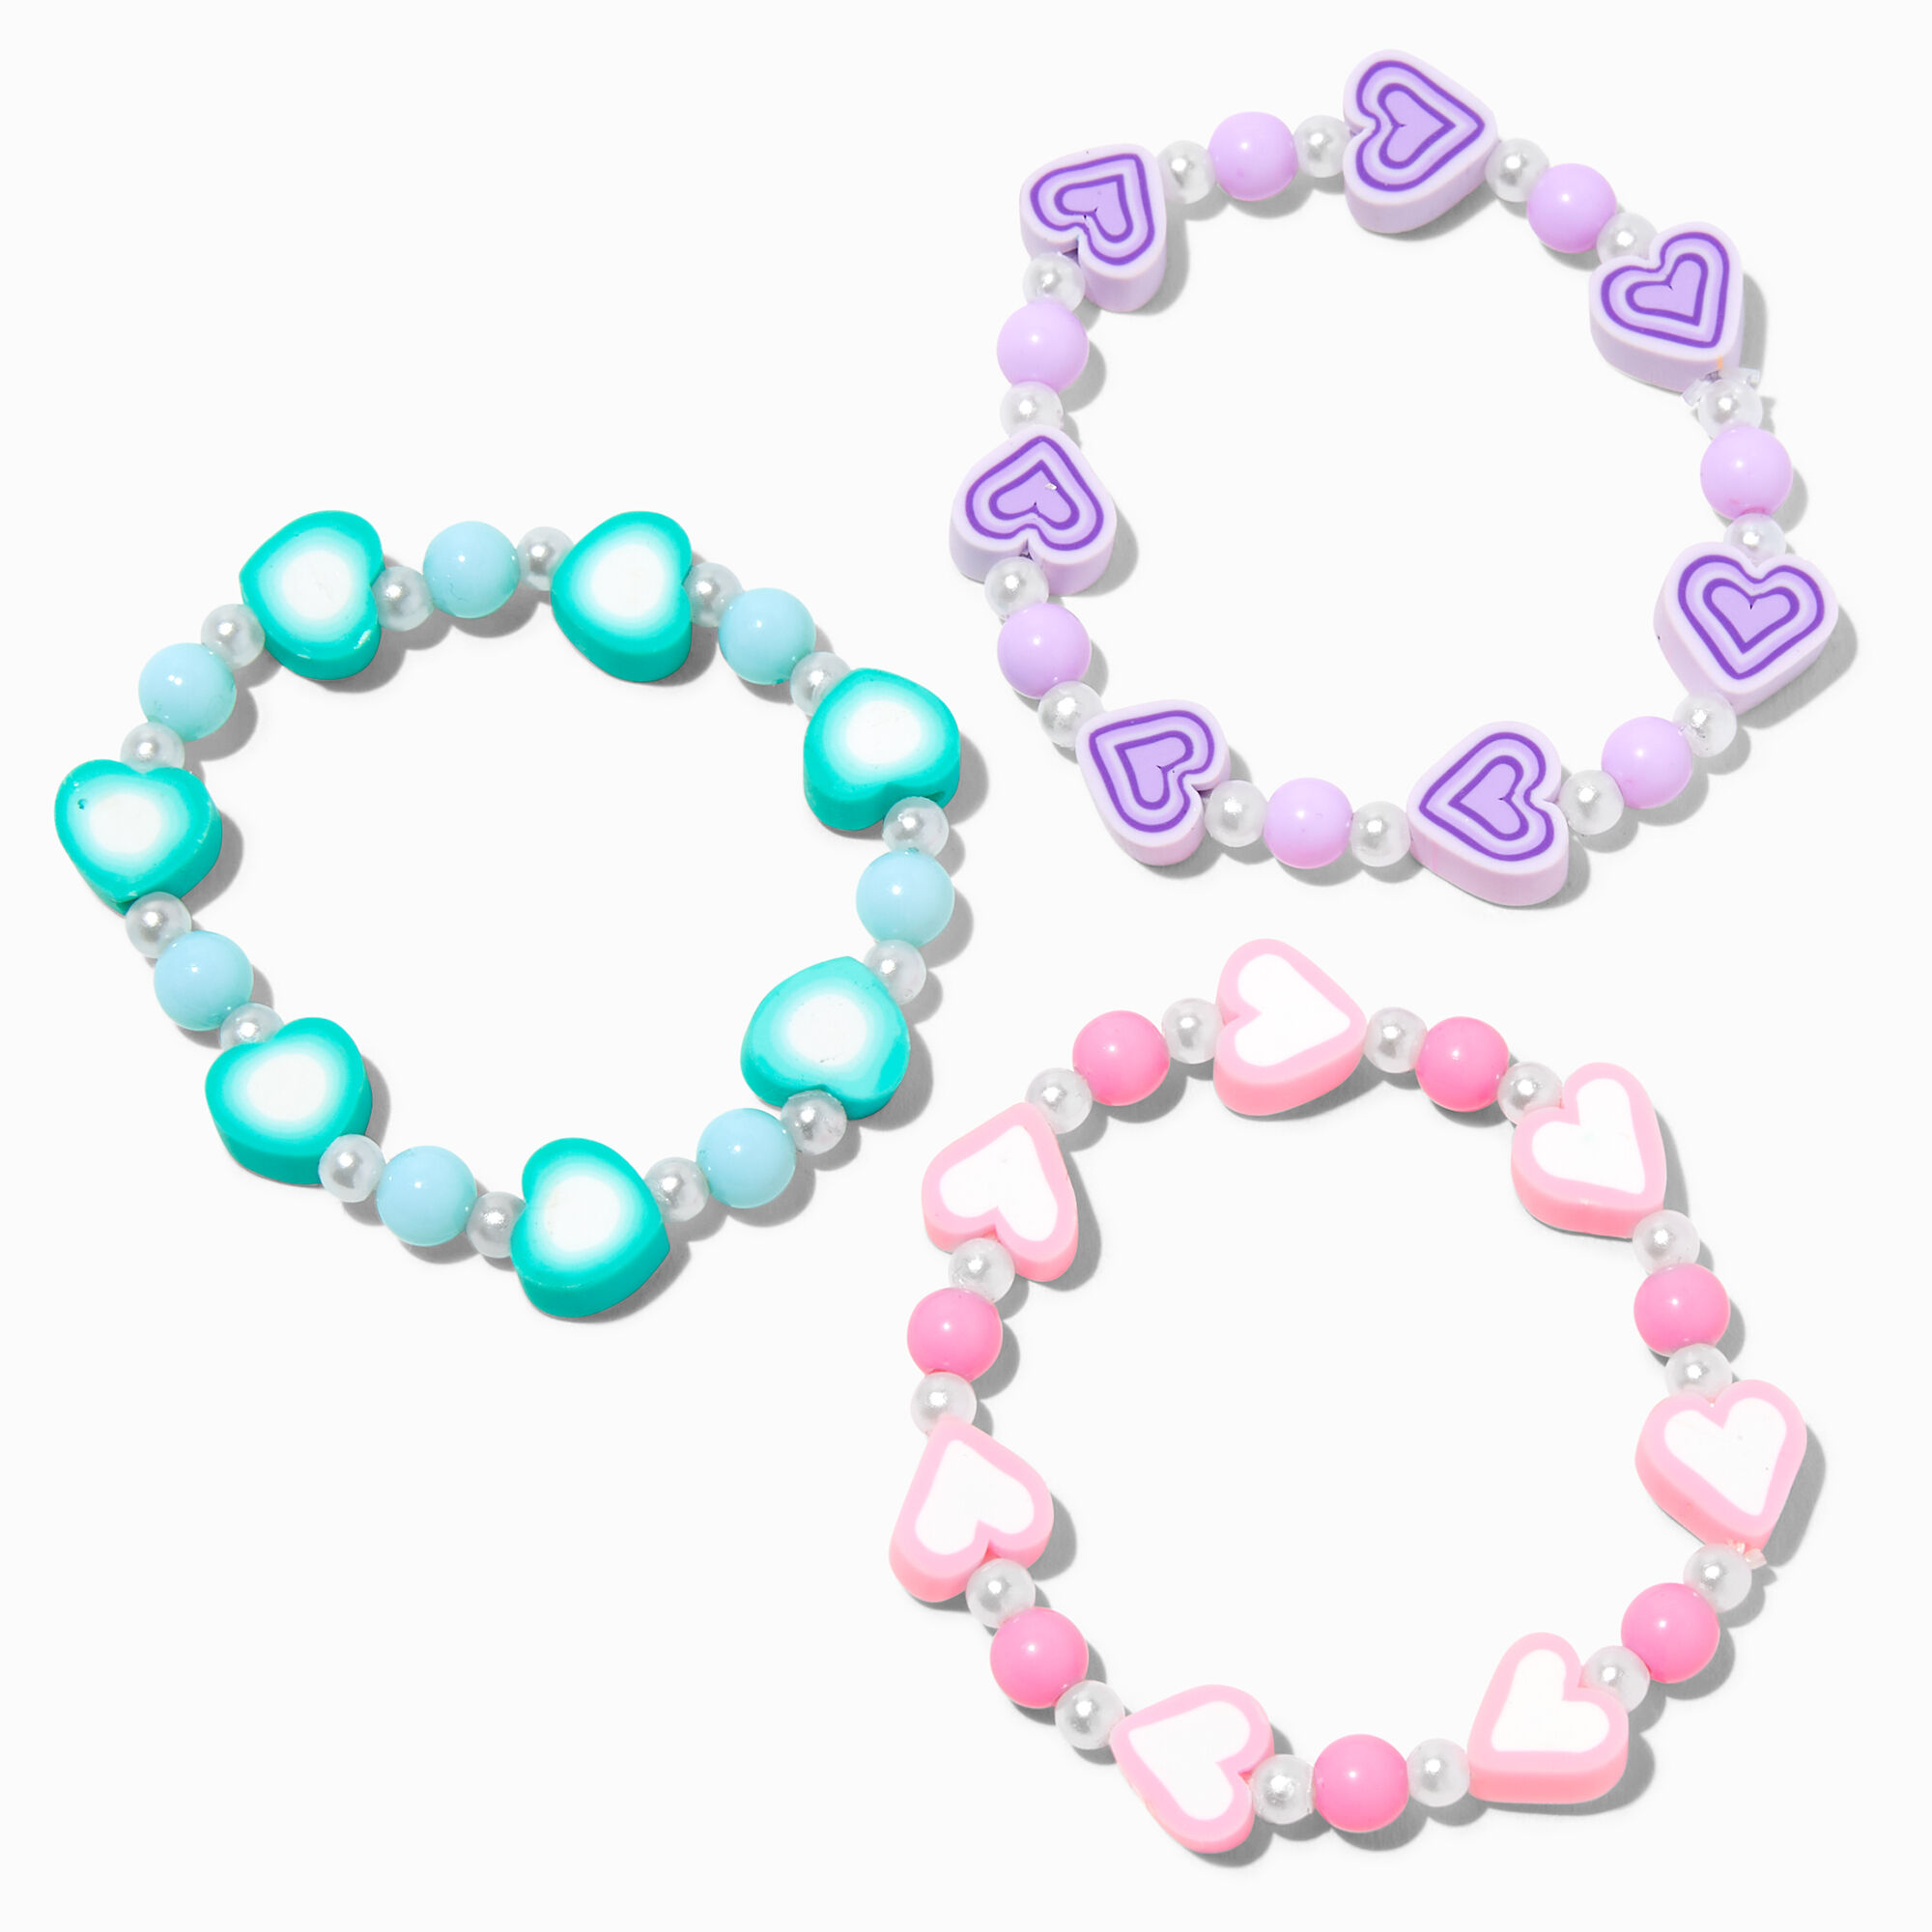 View Claires Club Pastel Heart Bead Stretch Bracelets 3 Pack Rainbow information